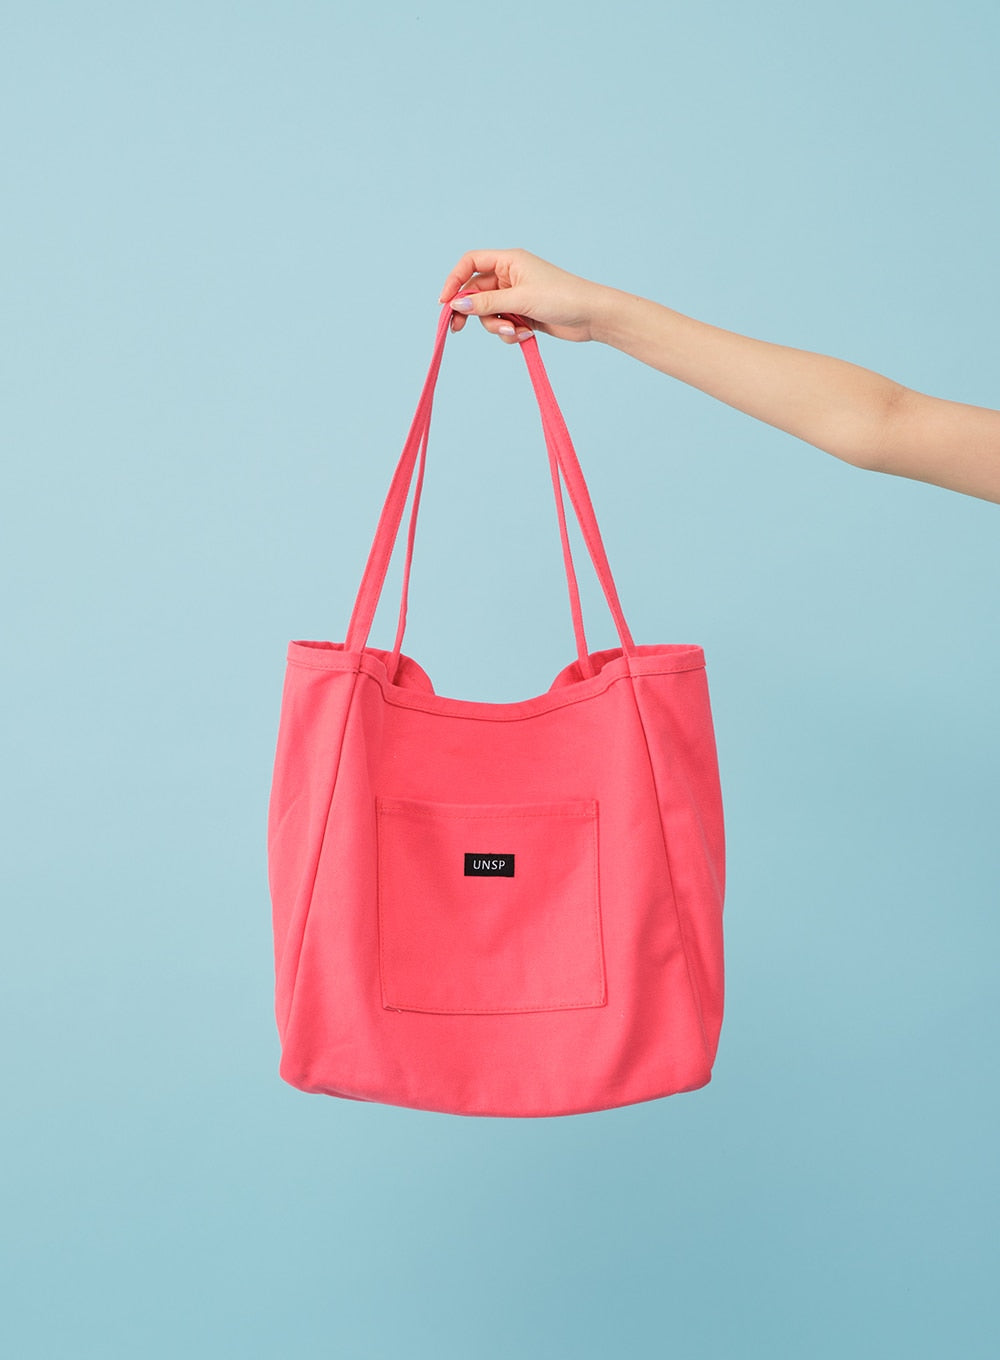 Pocketed Colorful Tote Bag BJ03